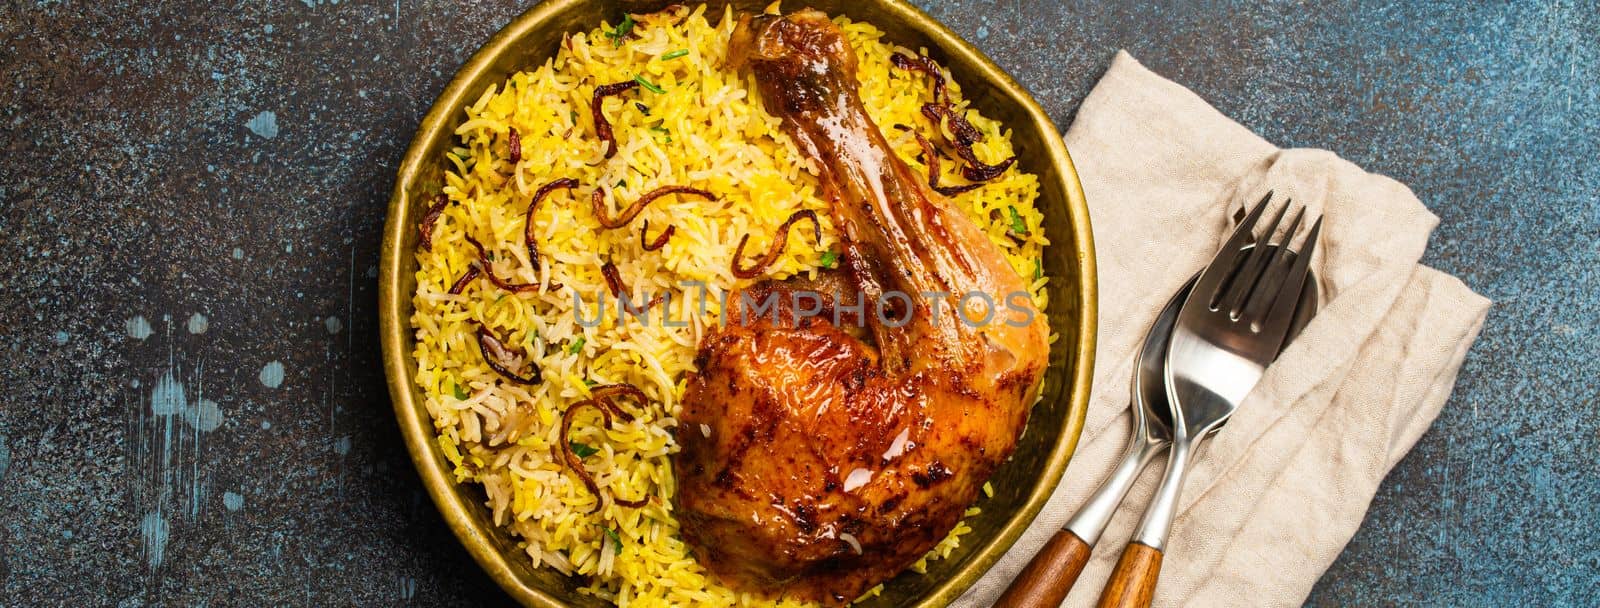 Delicious Indian dish Biryani chicken leg with basmati rice in metal brass old bowl on table rustic stone background. Traditional non-vegetarian food of India